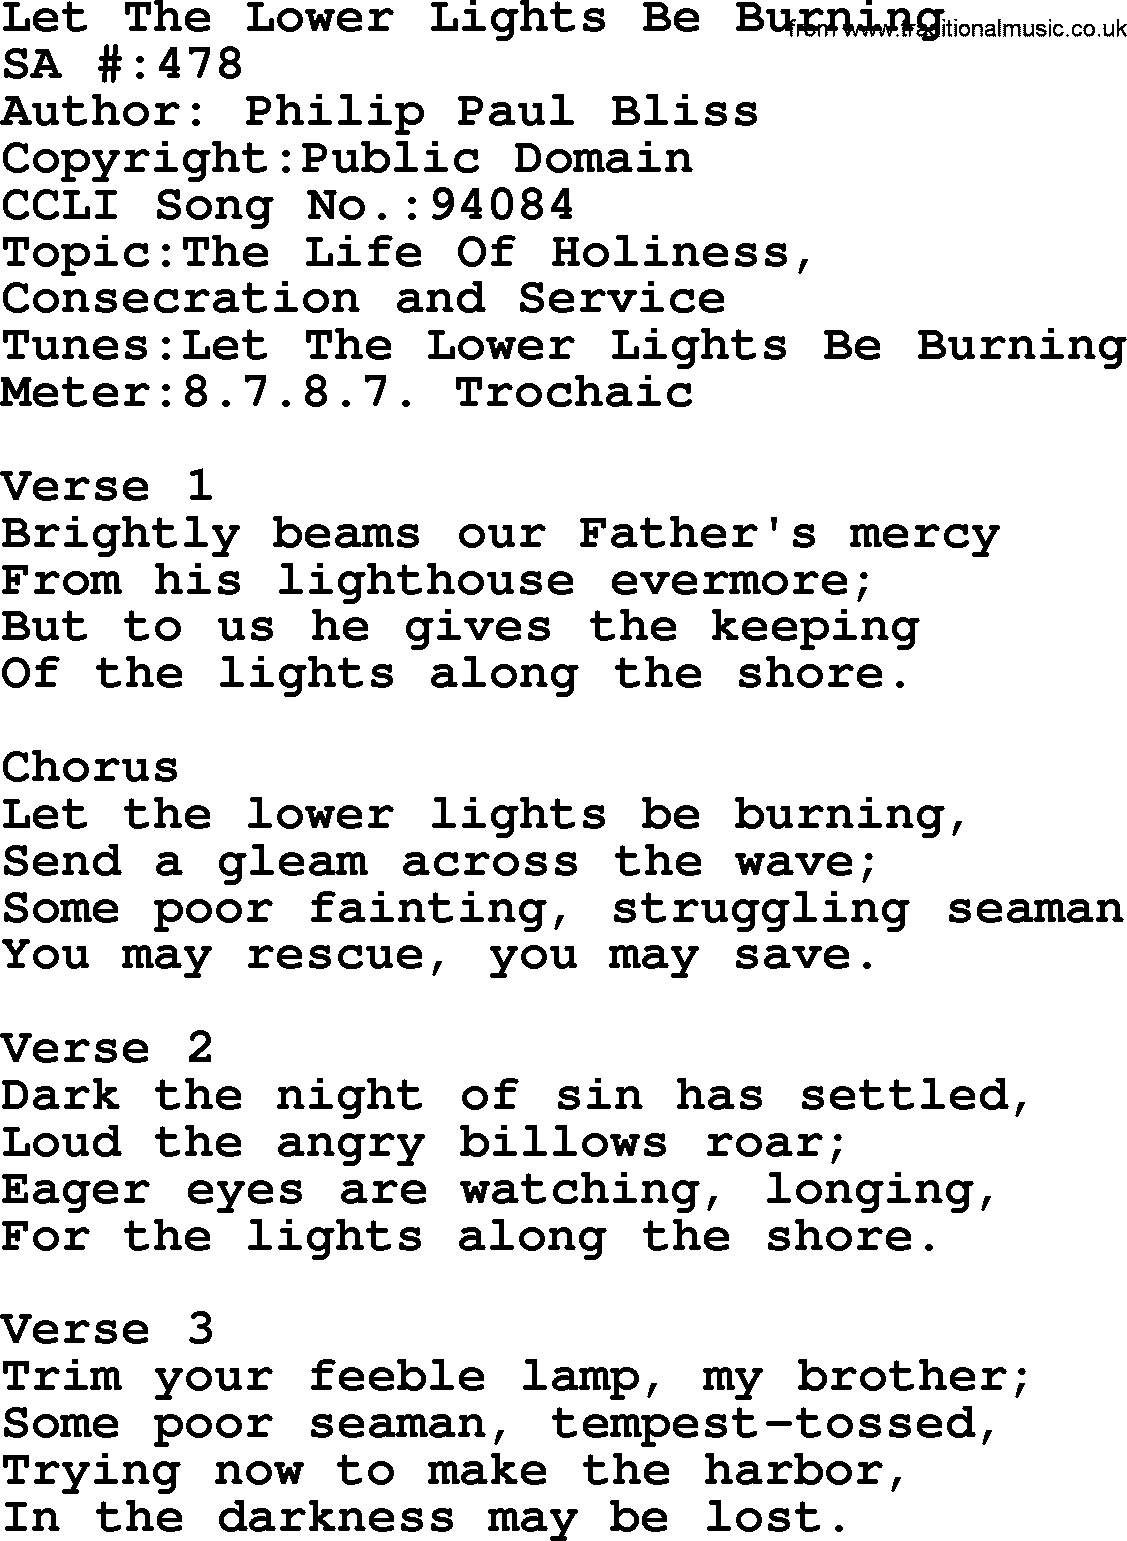 Salvation Army Hymnal, title: Let The Lower Lights Be Burning, with lyrics and PDF,